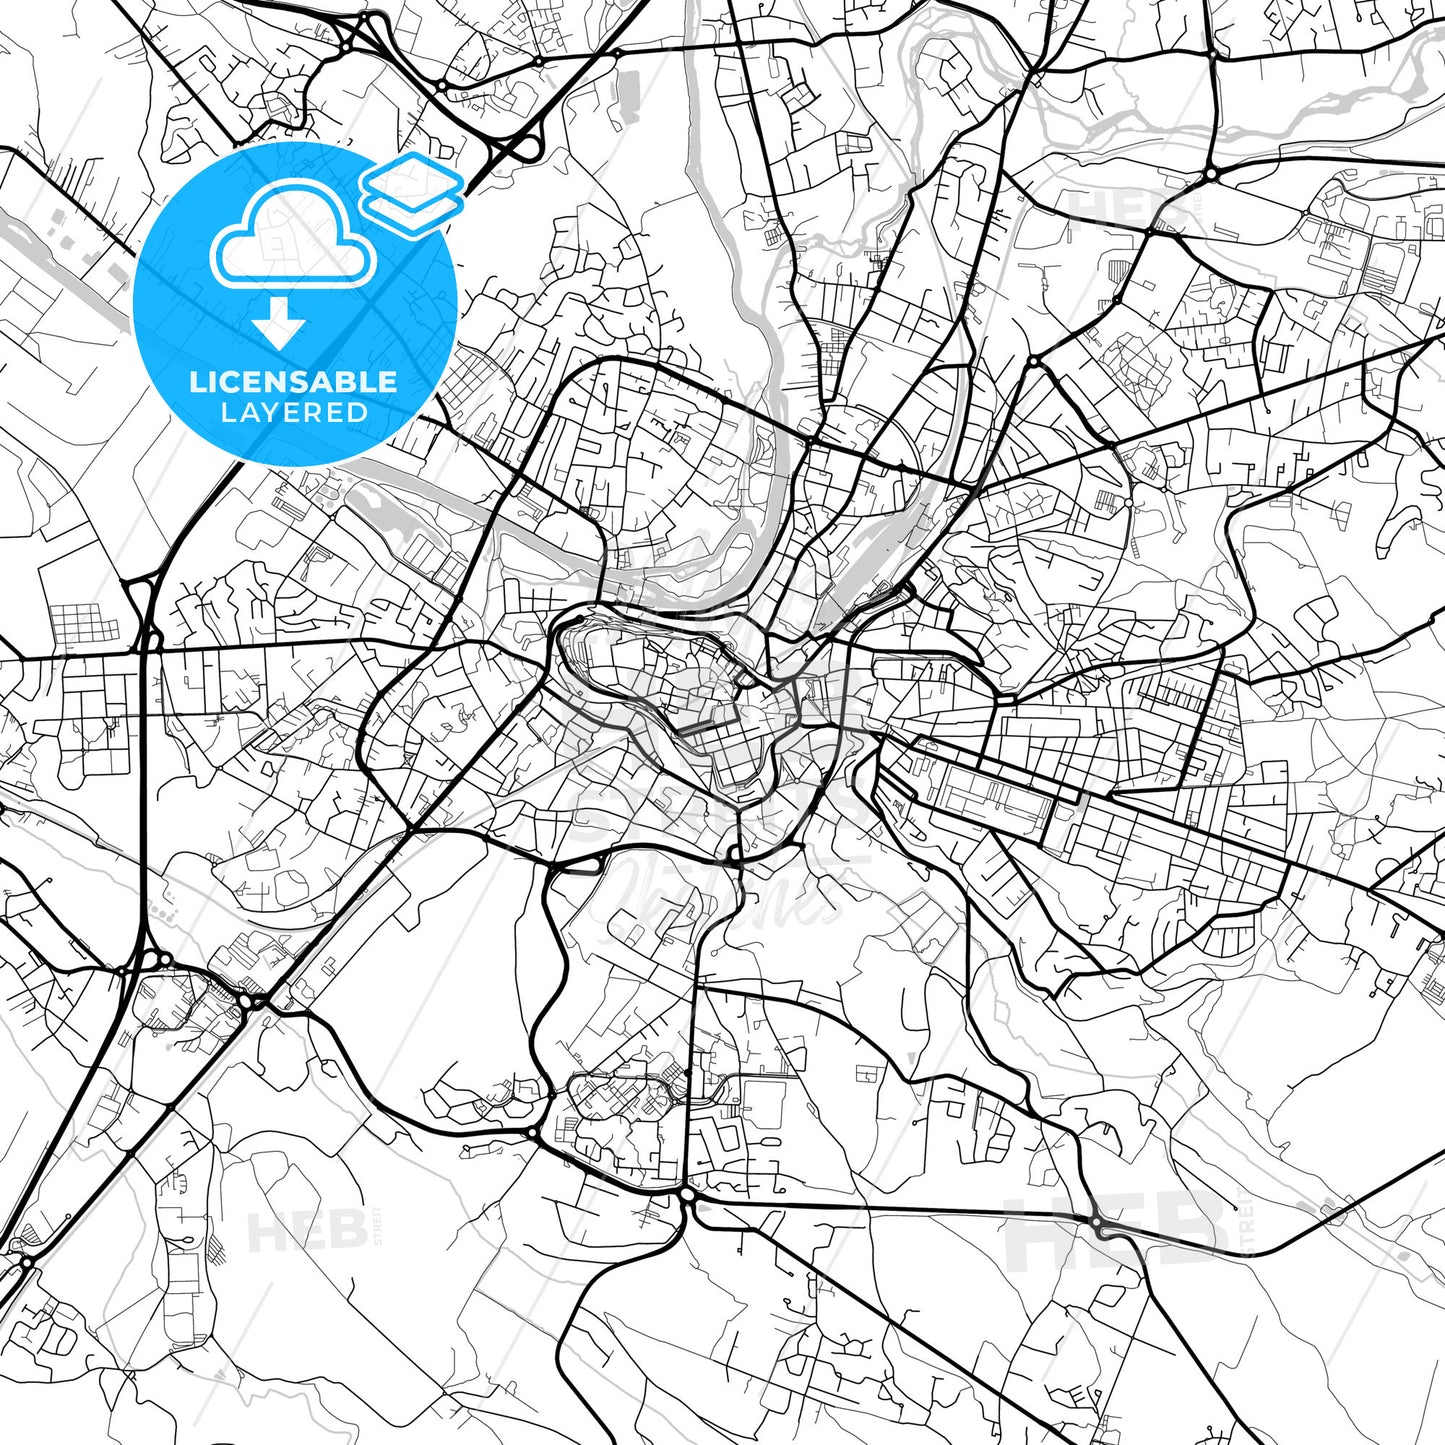 Layered PDF map of Angoulême, Charente, France